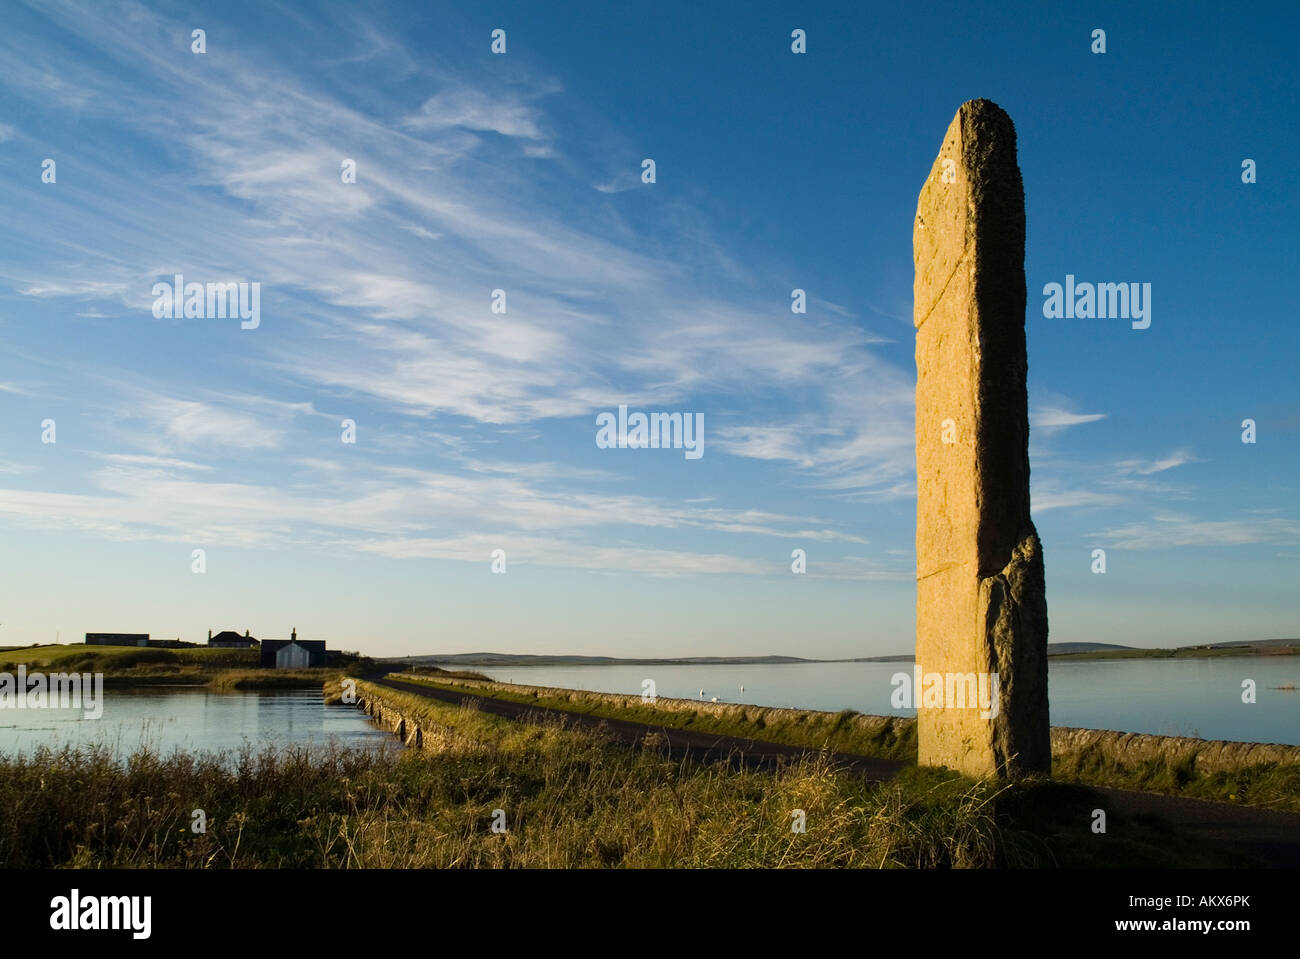 dh Watch stone STENNESS ORKNEY Neolithic standing stone Loch Stenness and Loch Harray causeway prehistoric britain heritage Stock Photo